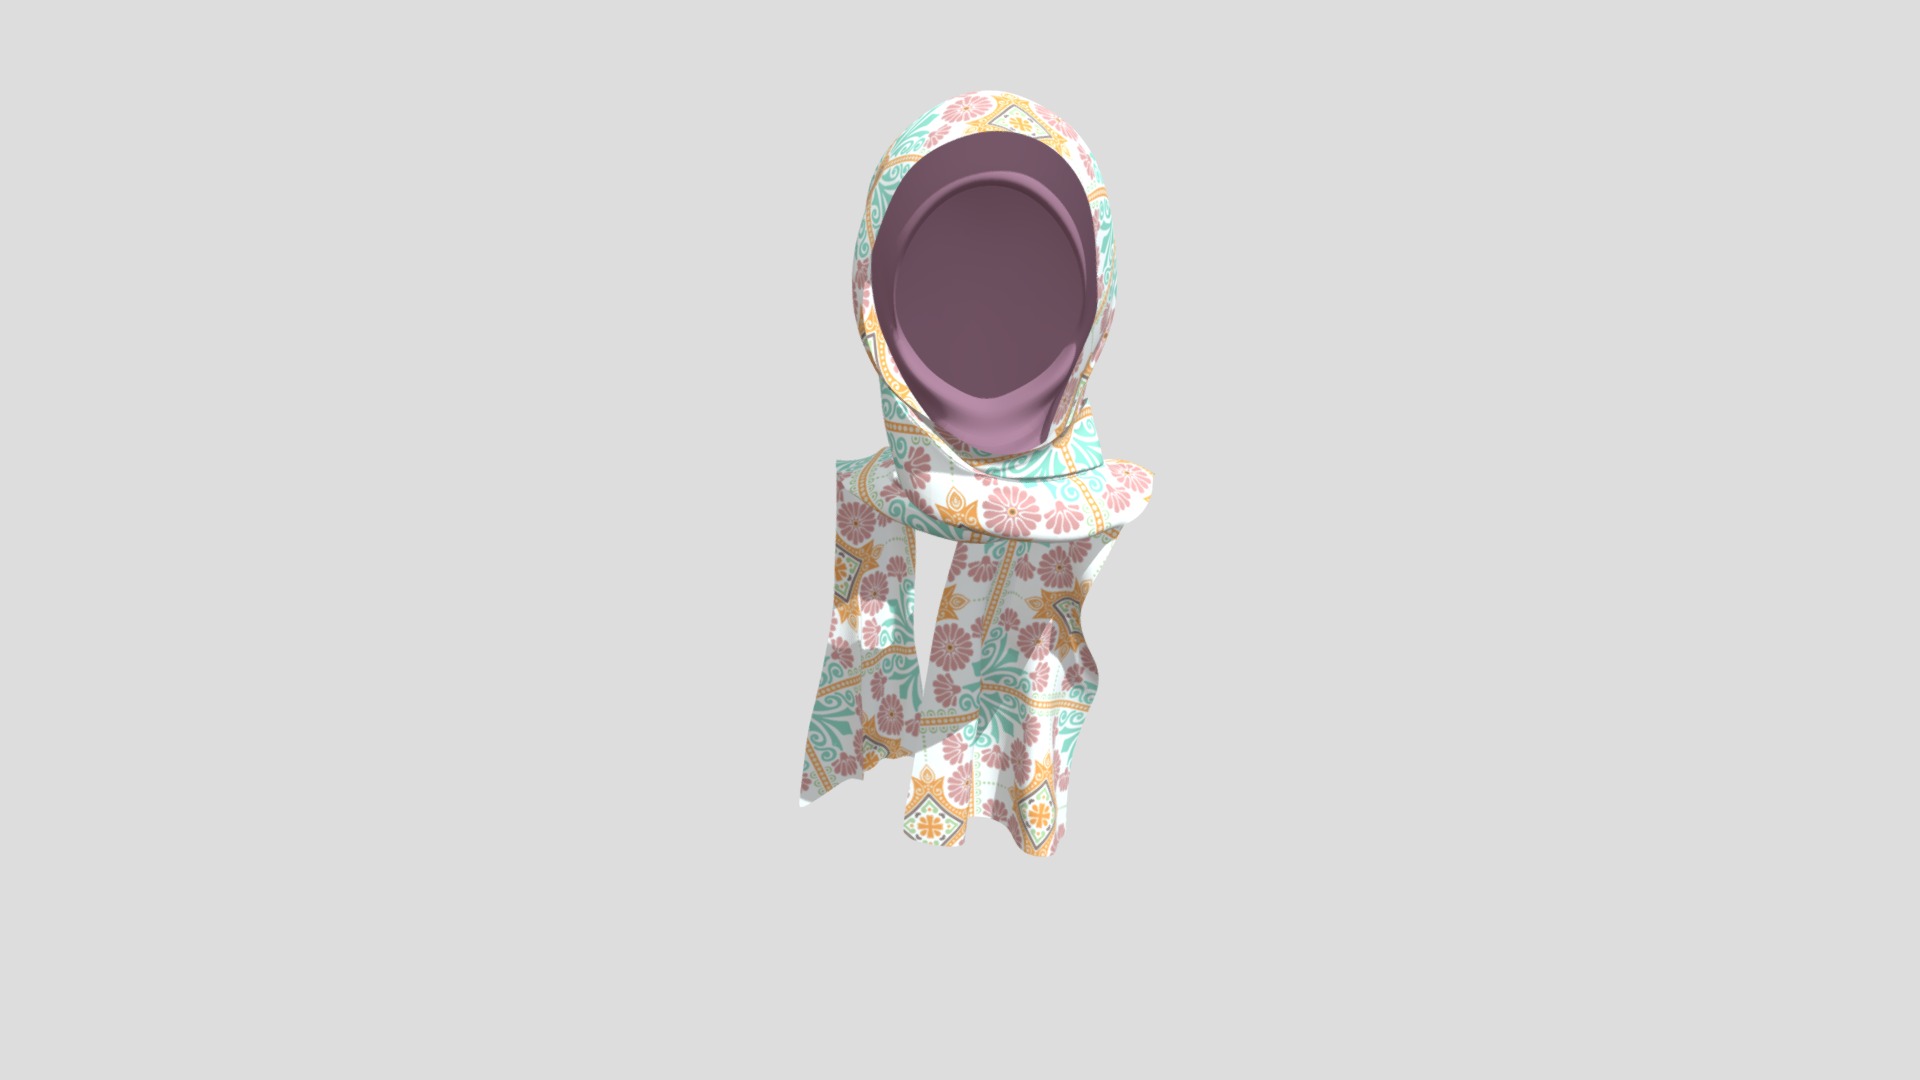 3D model Hijab Model 3 - This is a 3D model of the Hijab Model 3. The 3D model is about a colorful mask with a black circle around it.